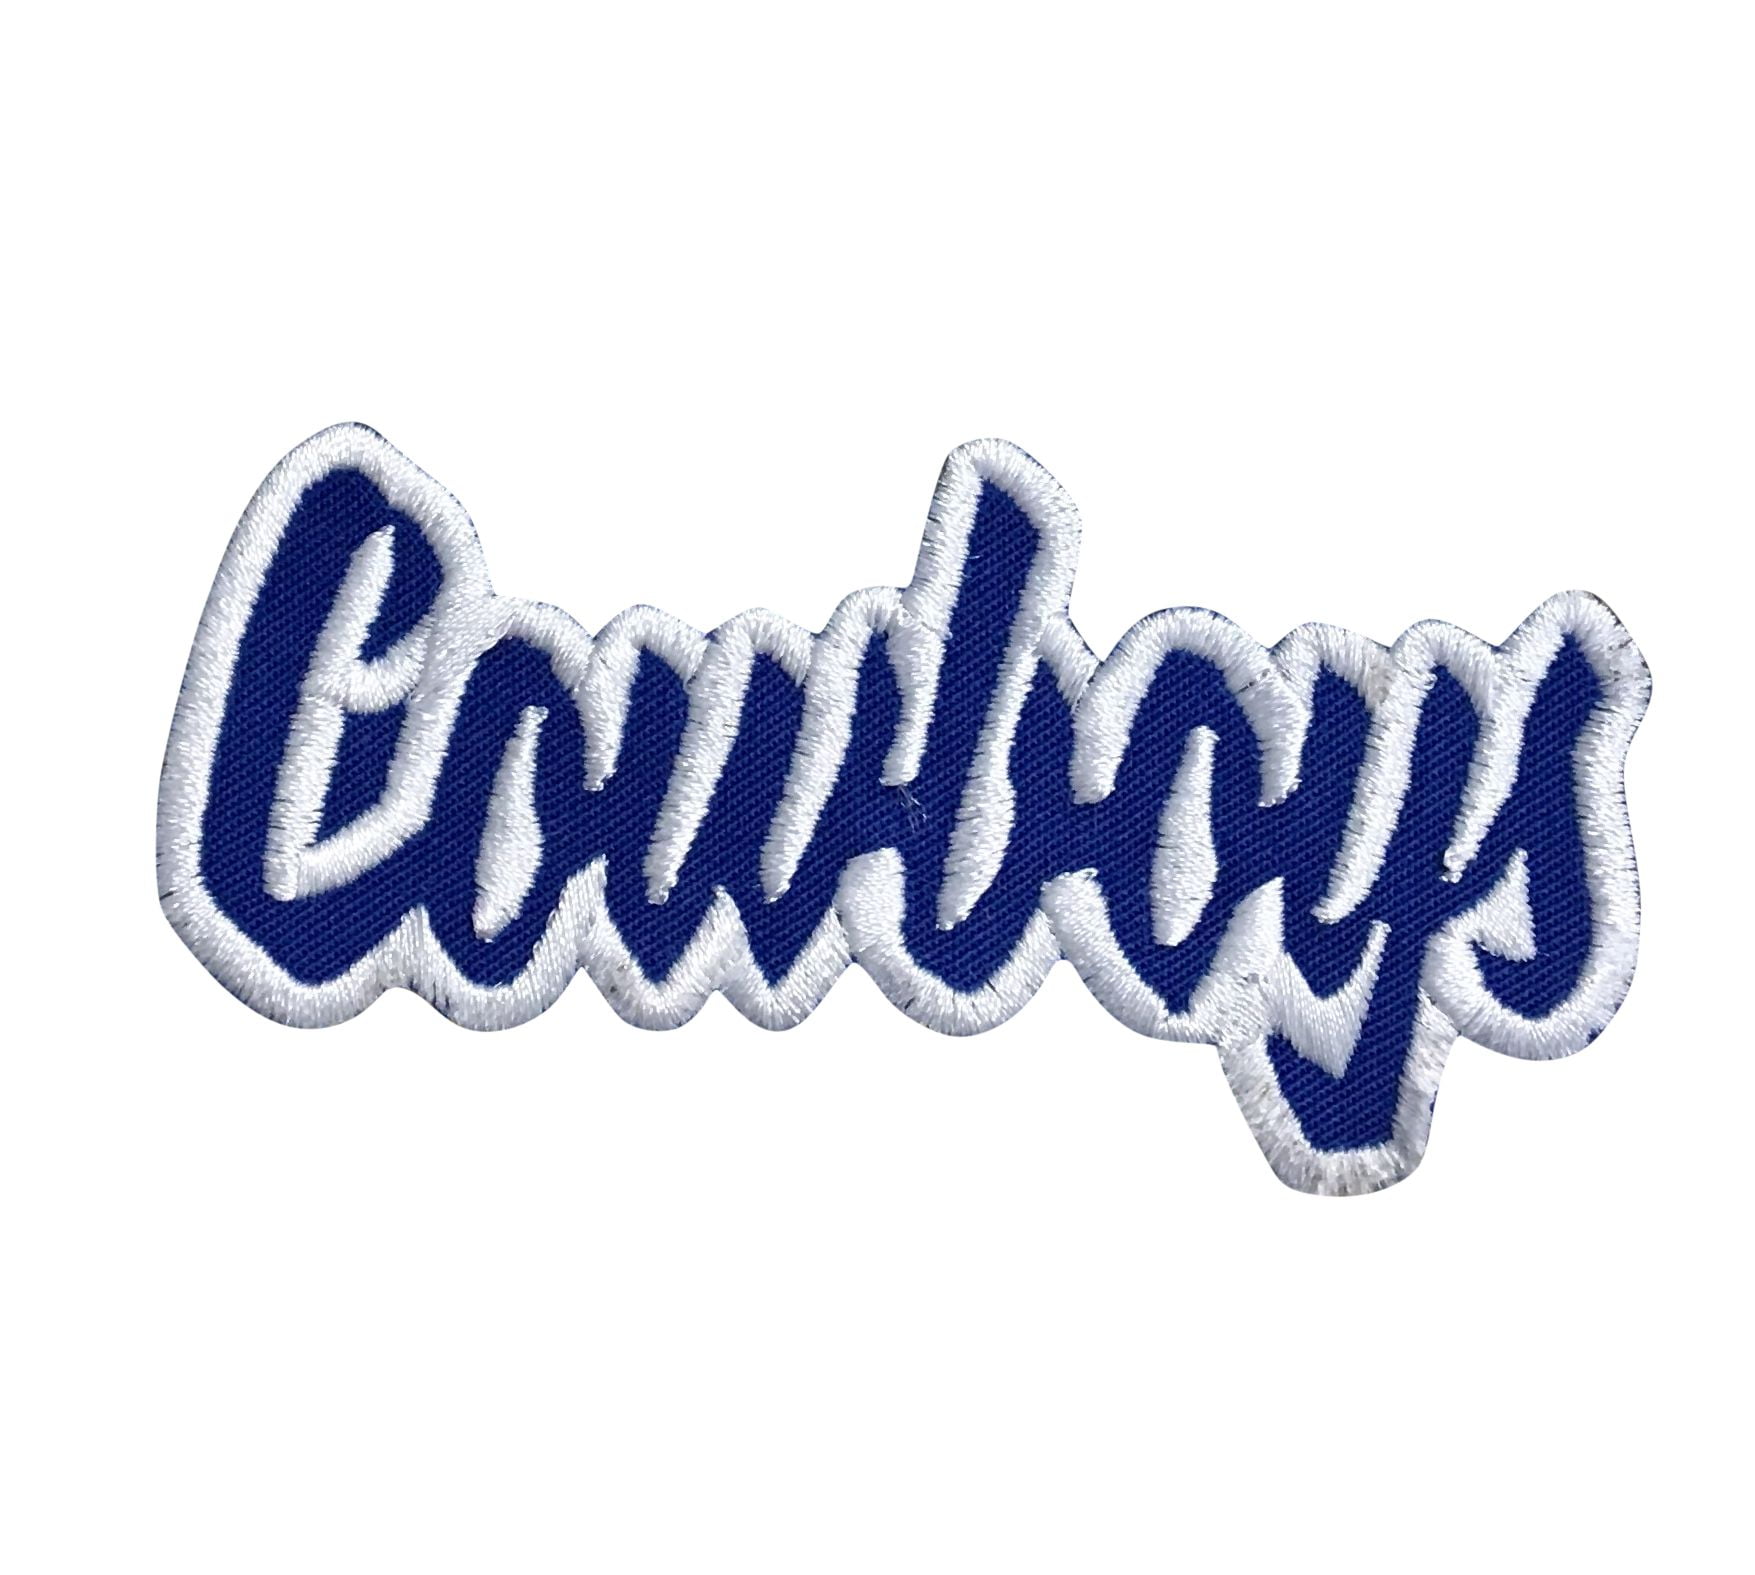 Dallas Cowboys Iron on Patches Embroidered Badge Patch Applique Word Sew FN